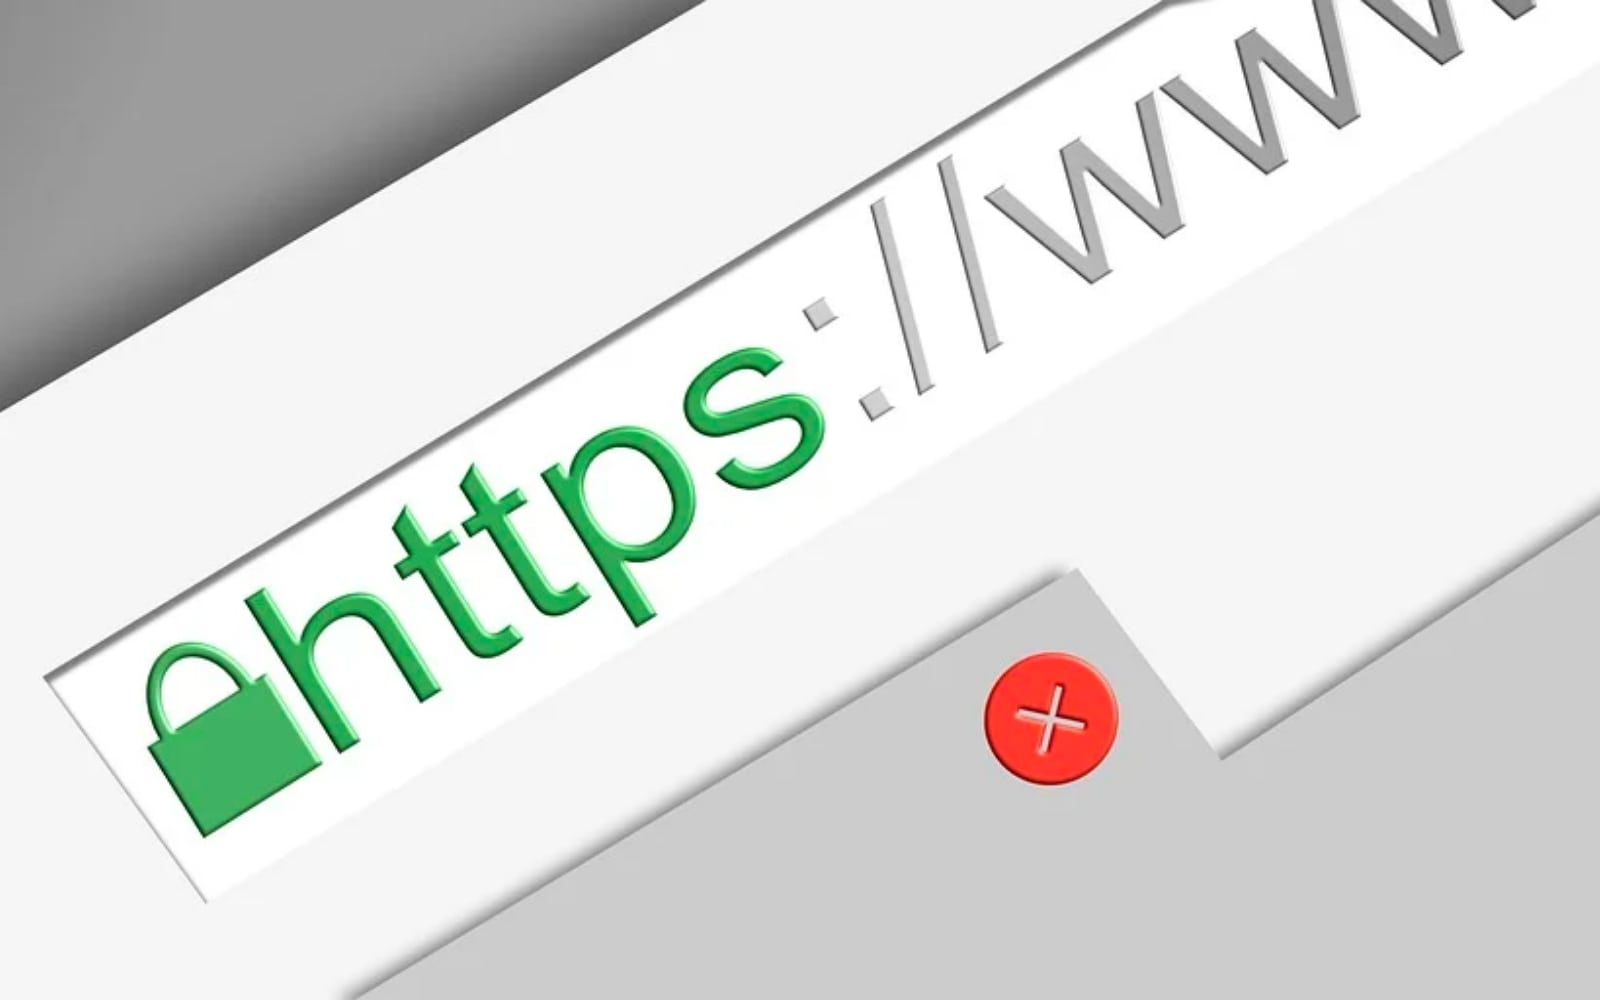 Step 13: Secure your website with HTTPS